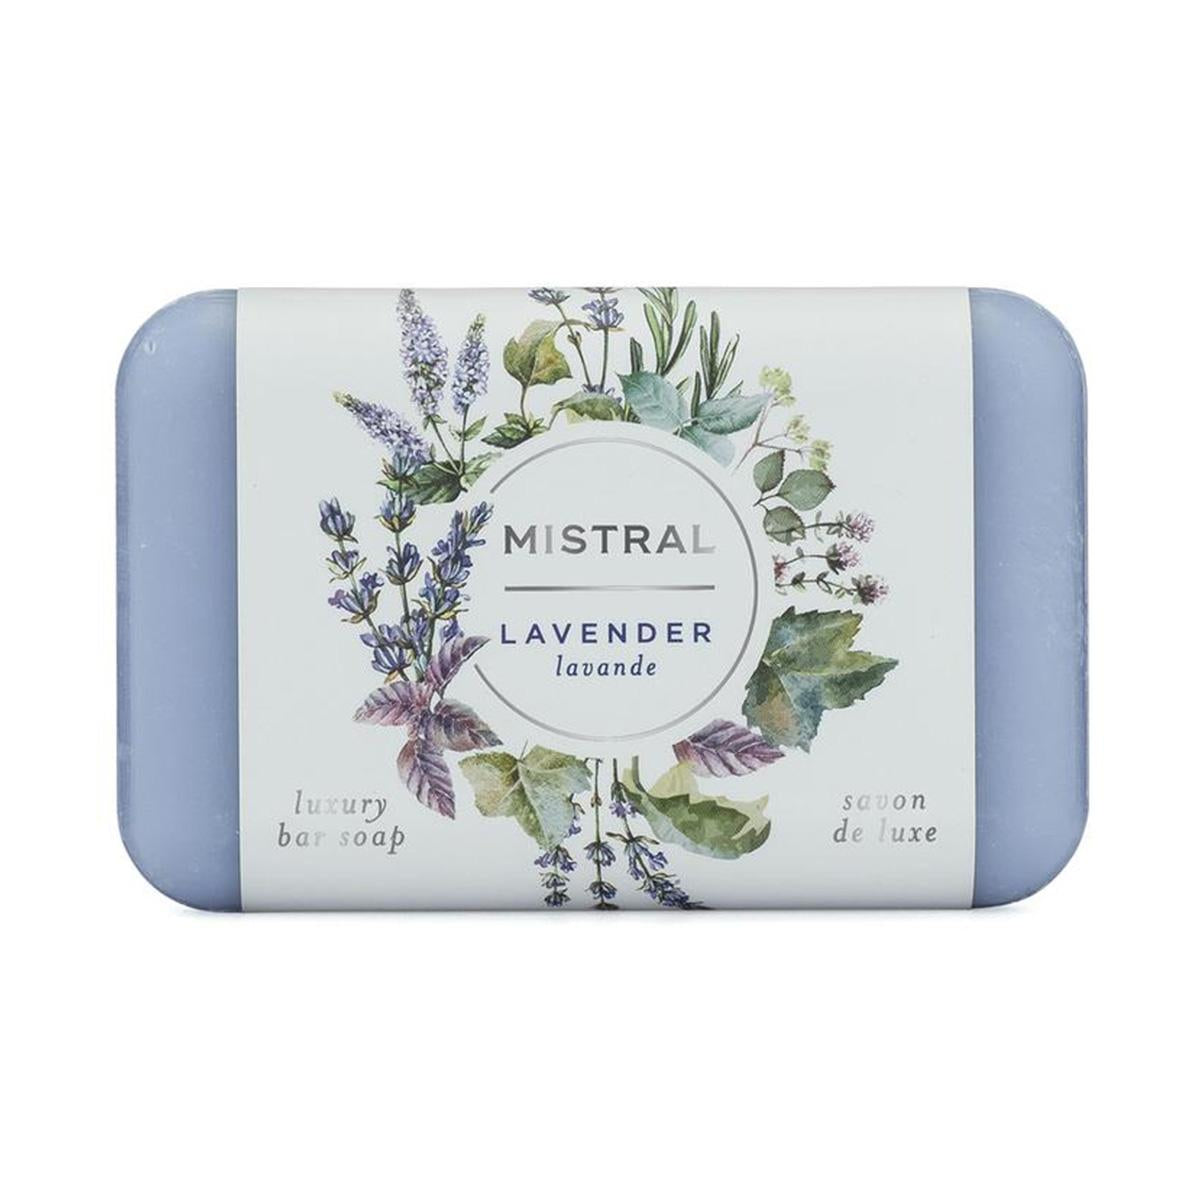 Primary image of Lavender Classic Bar Soap